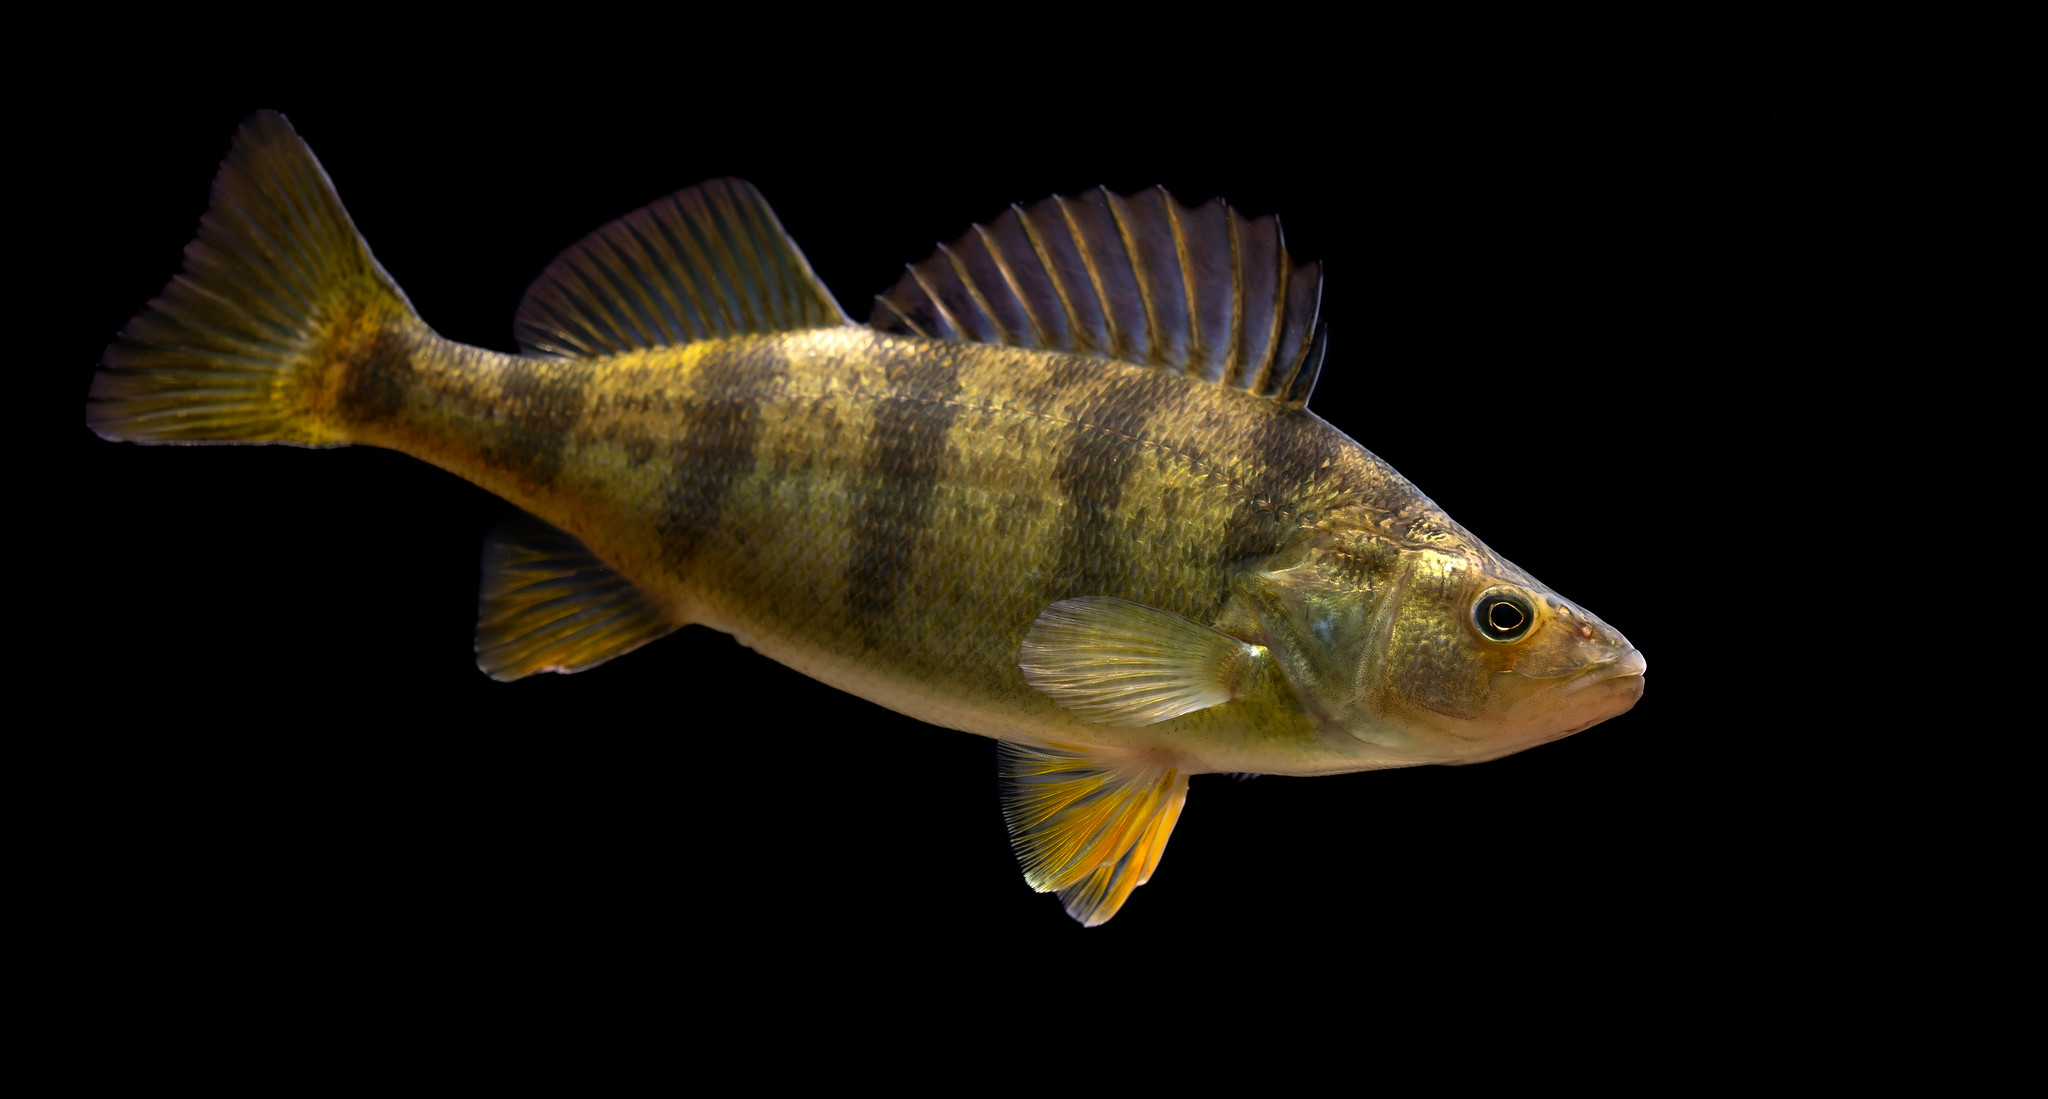 A small yellow fish with brown vertical stripes.